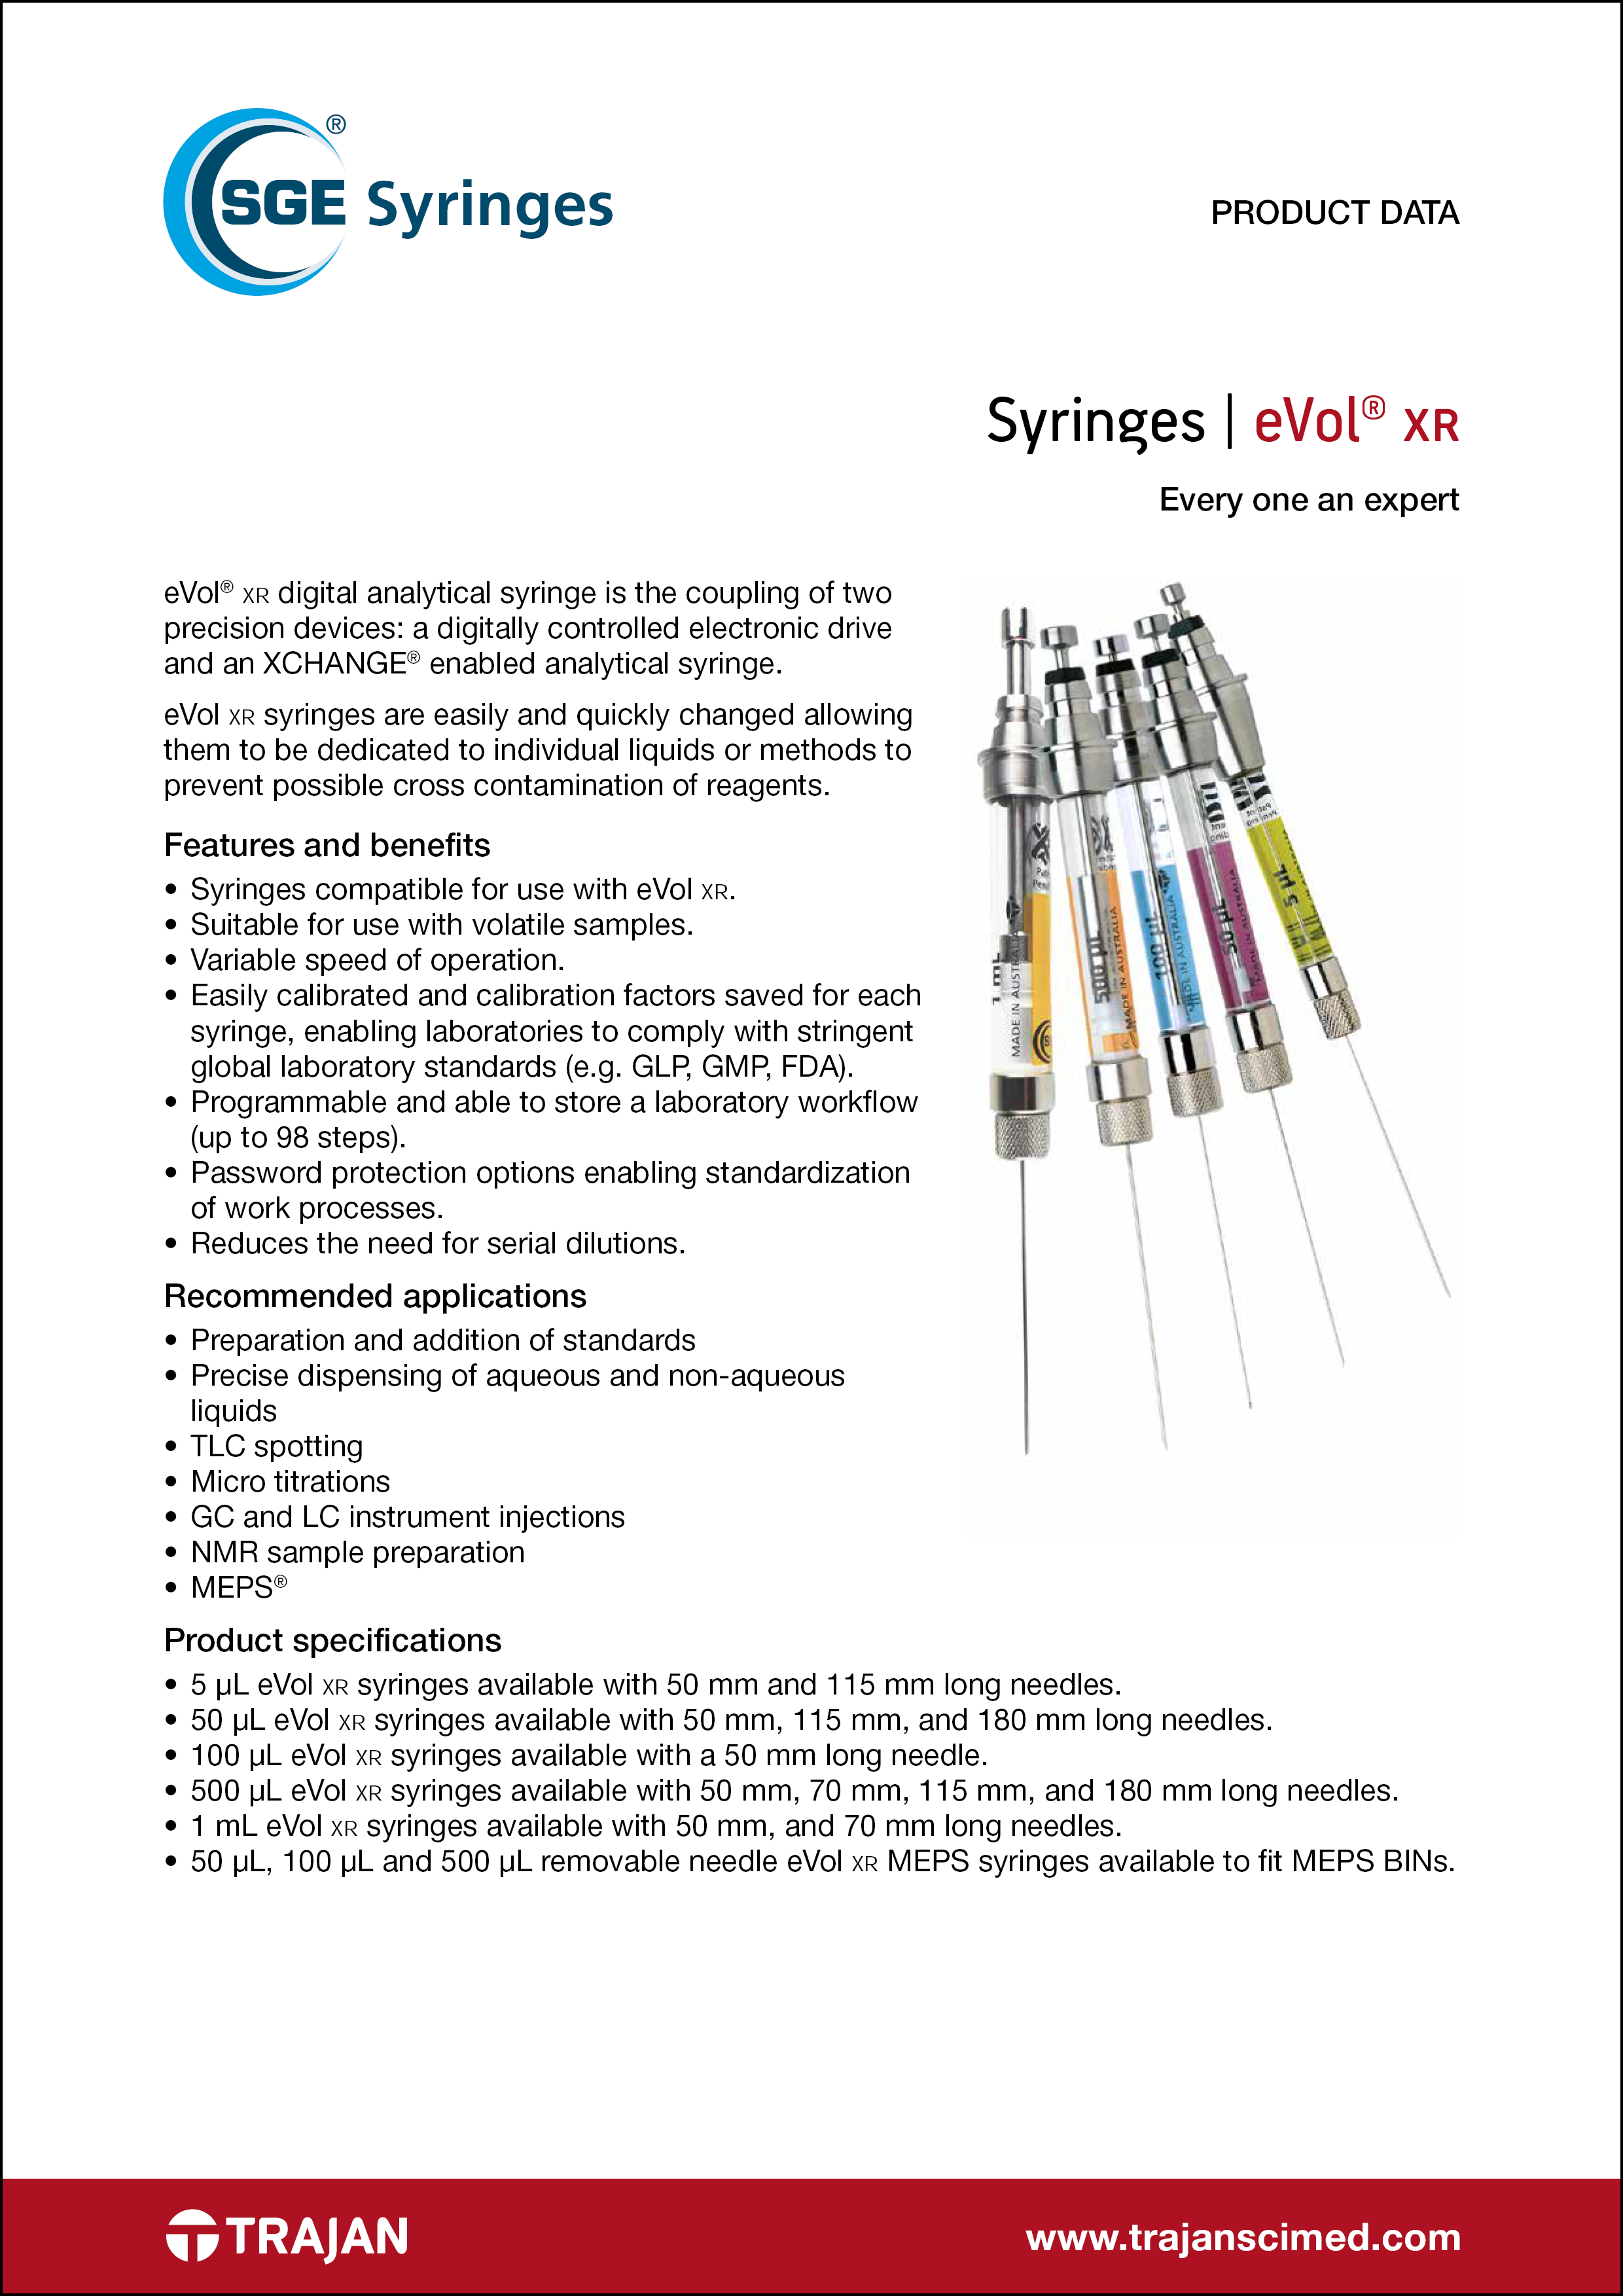 Product Data Sheet - eVol® <span style="font-variant: small-caps;">xr</span> syringes